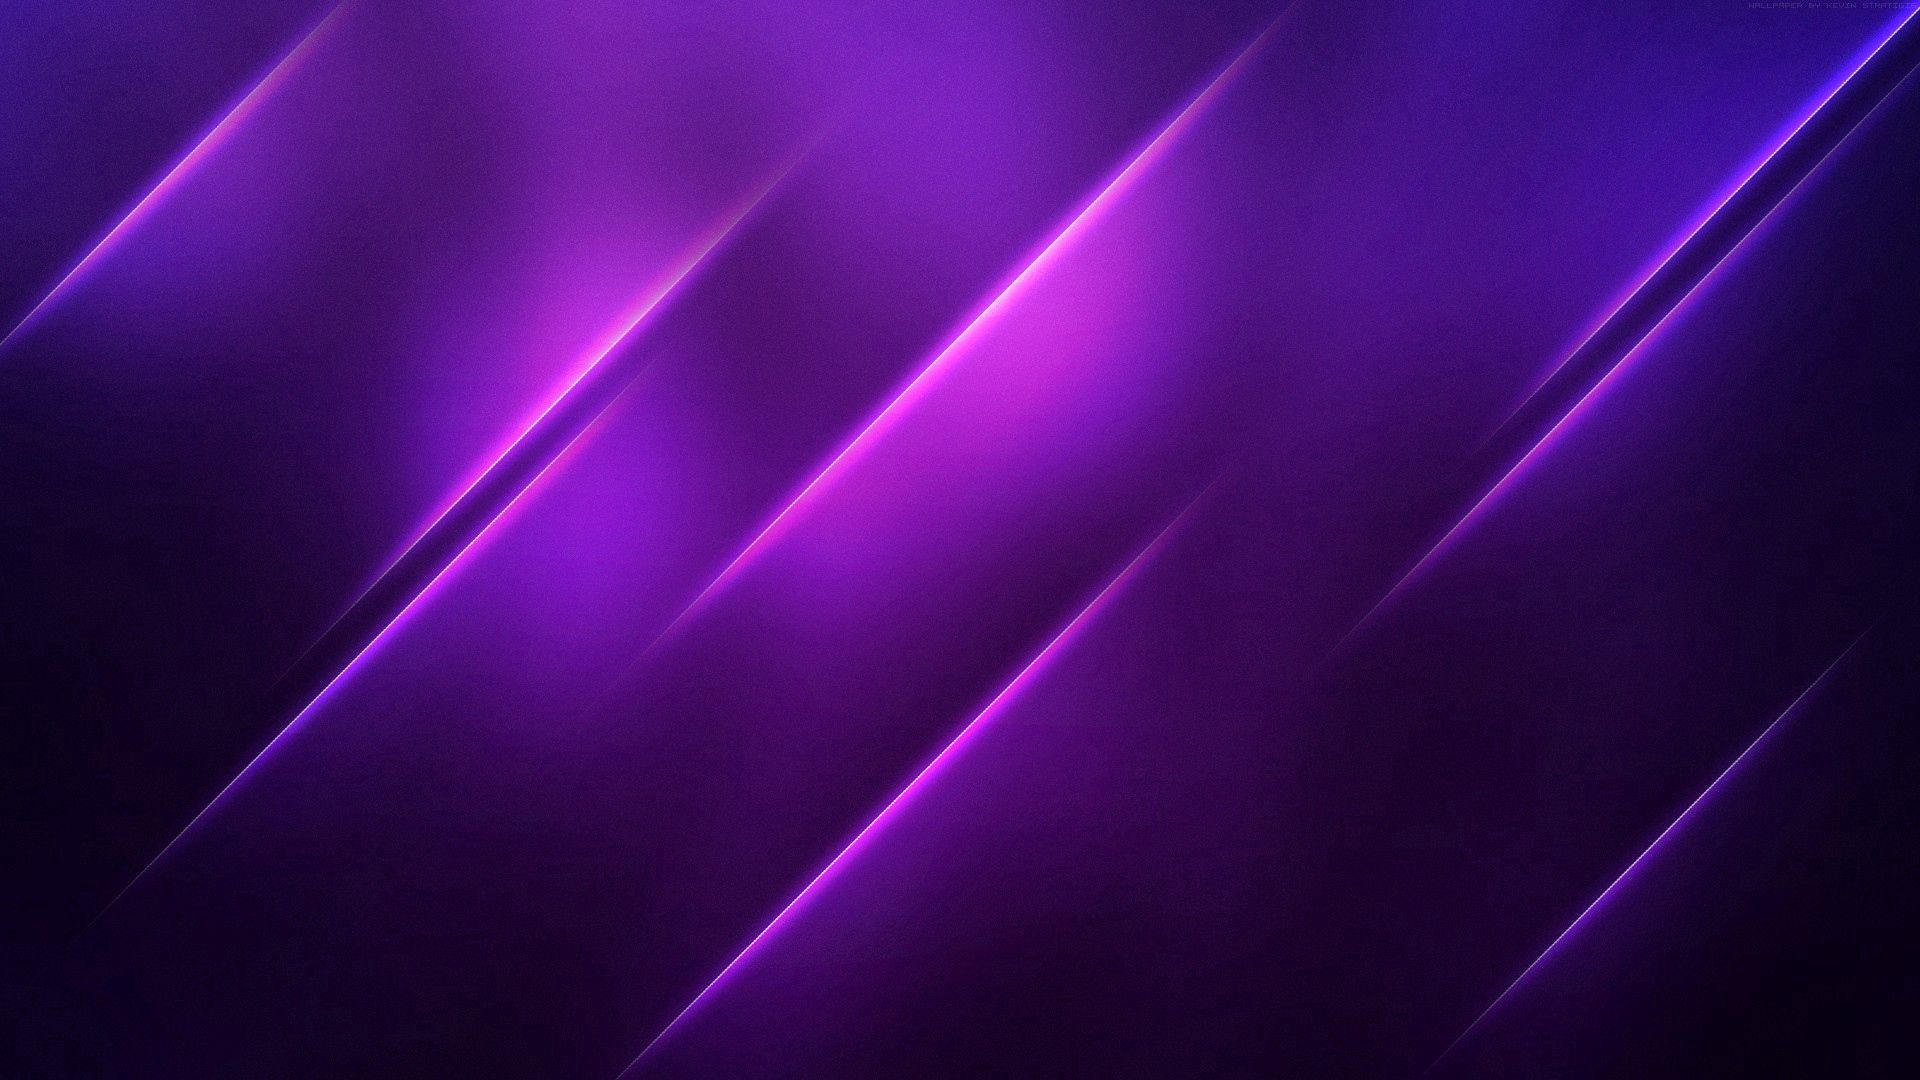 Mobile wallpaper purple, violet, obliquely, abstract, bright, lines